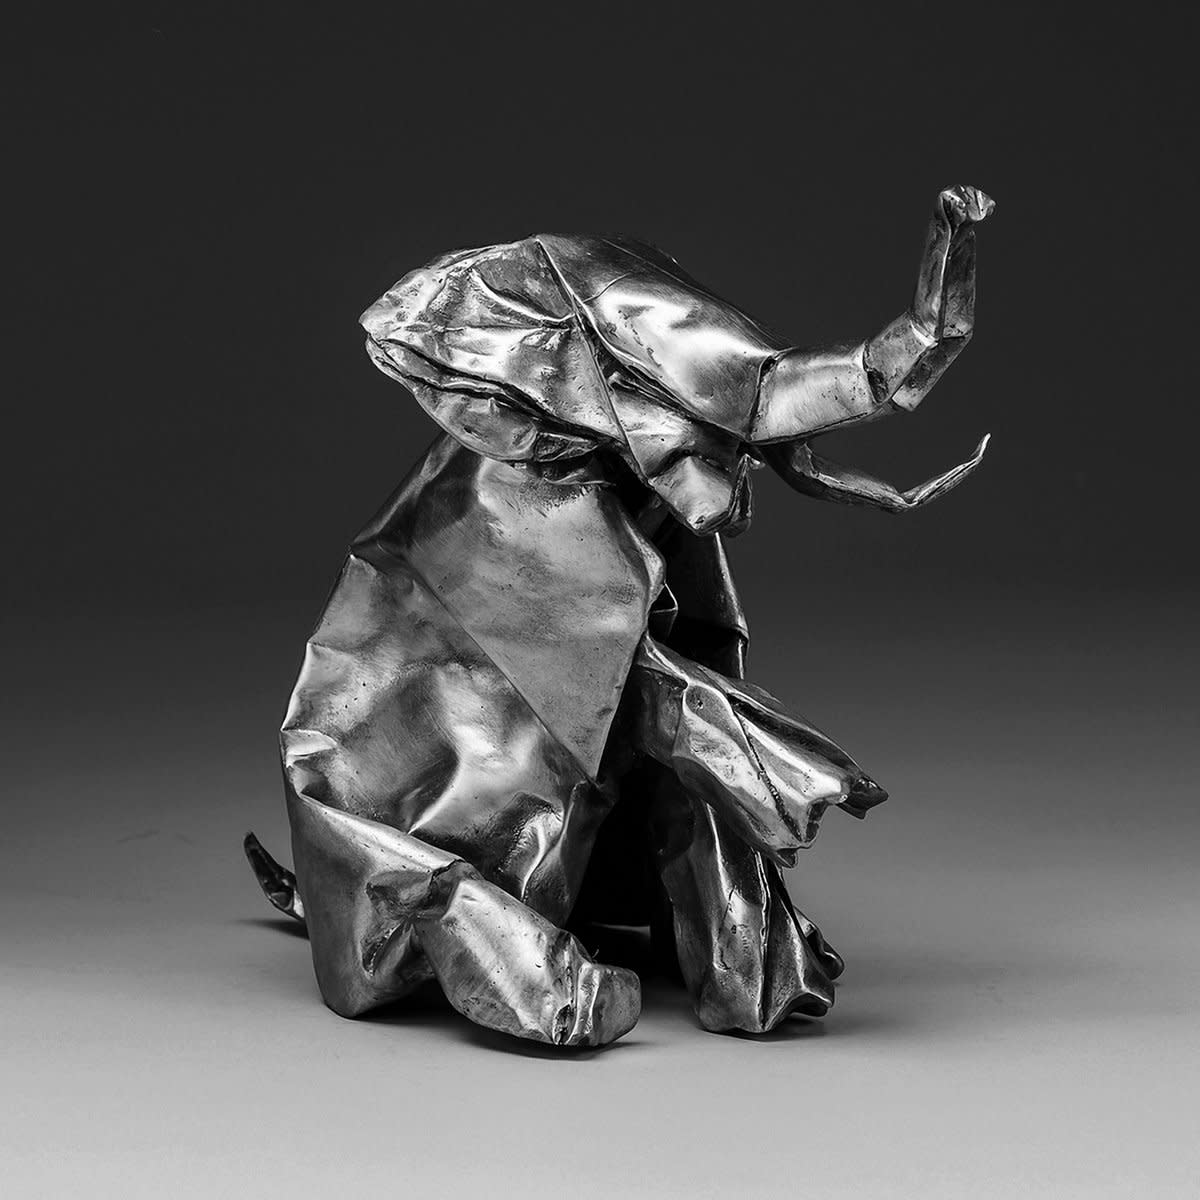 Jlin to release second album Black Origami on Planet Mu